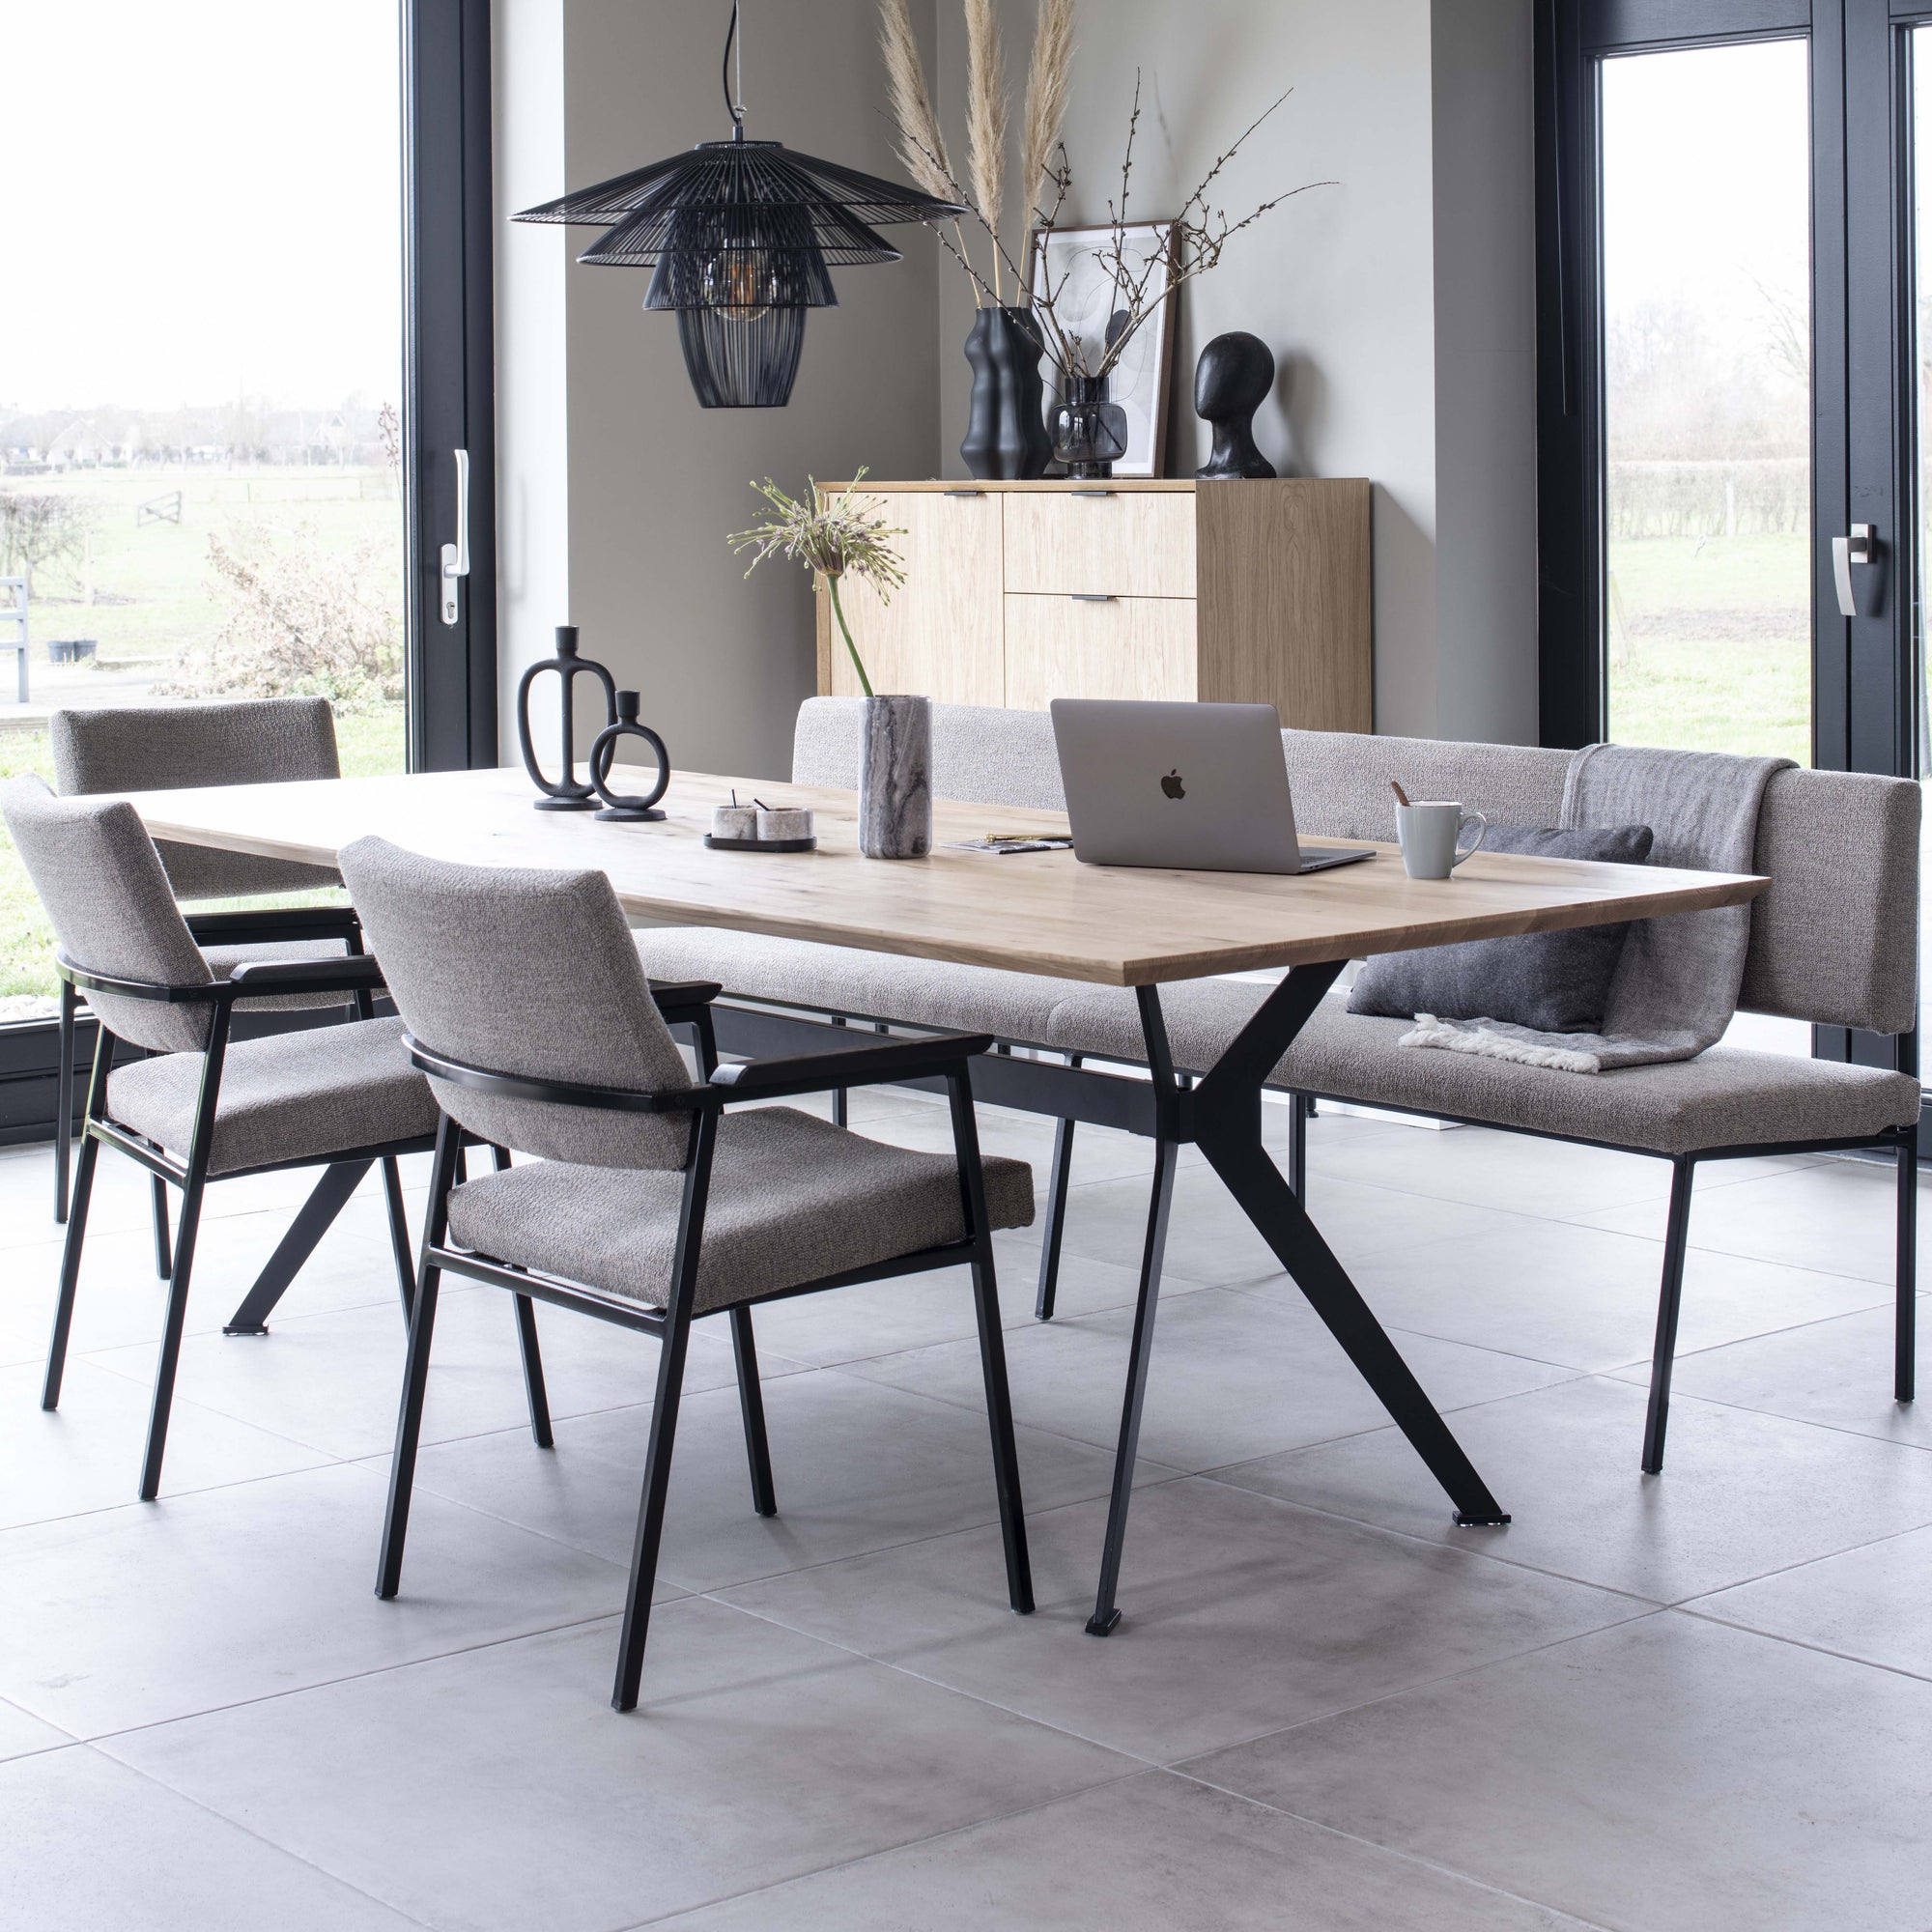 voorraad shuttle beklimmen Dining Chair Dexter | Bodilson Contemporary Furniture and Decor